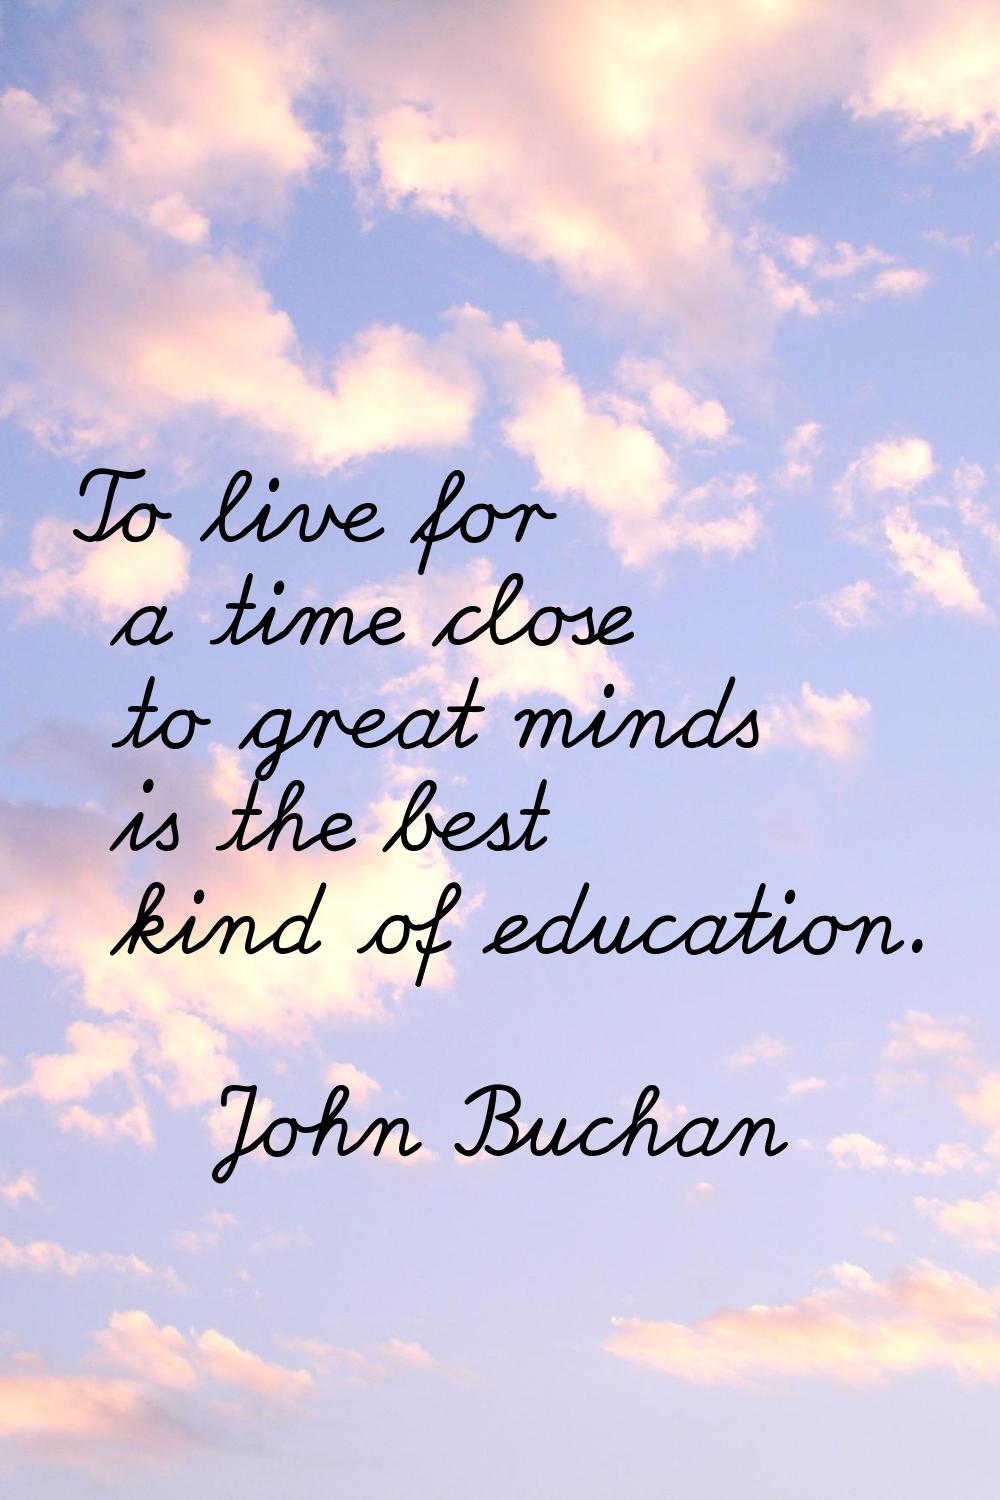 To live for a time close to great minds is the best kind of education.